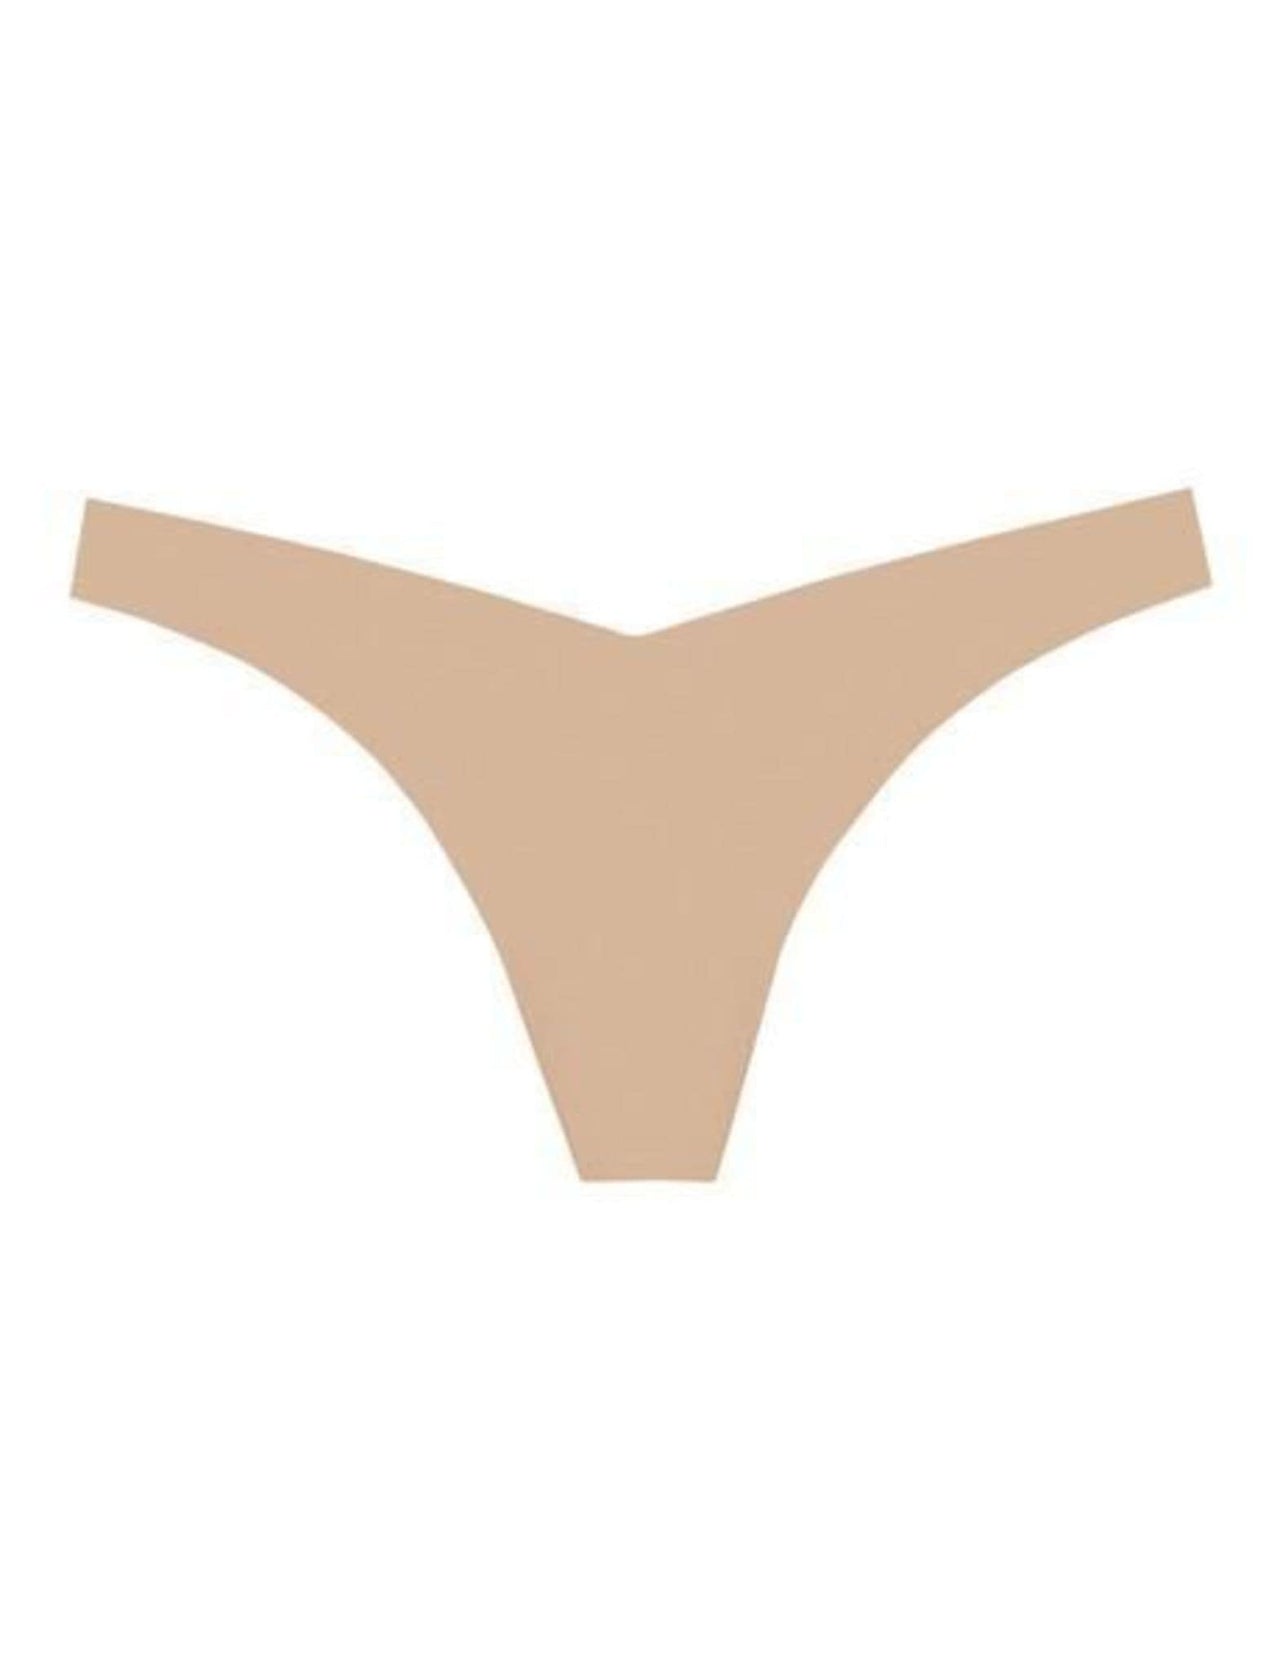 SKINY thong in beige